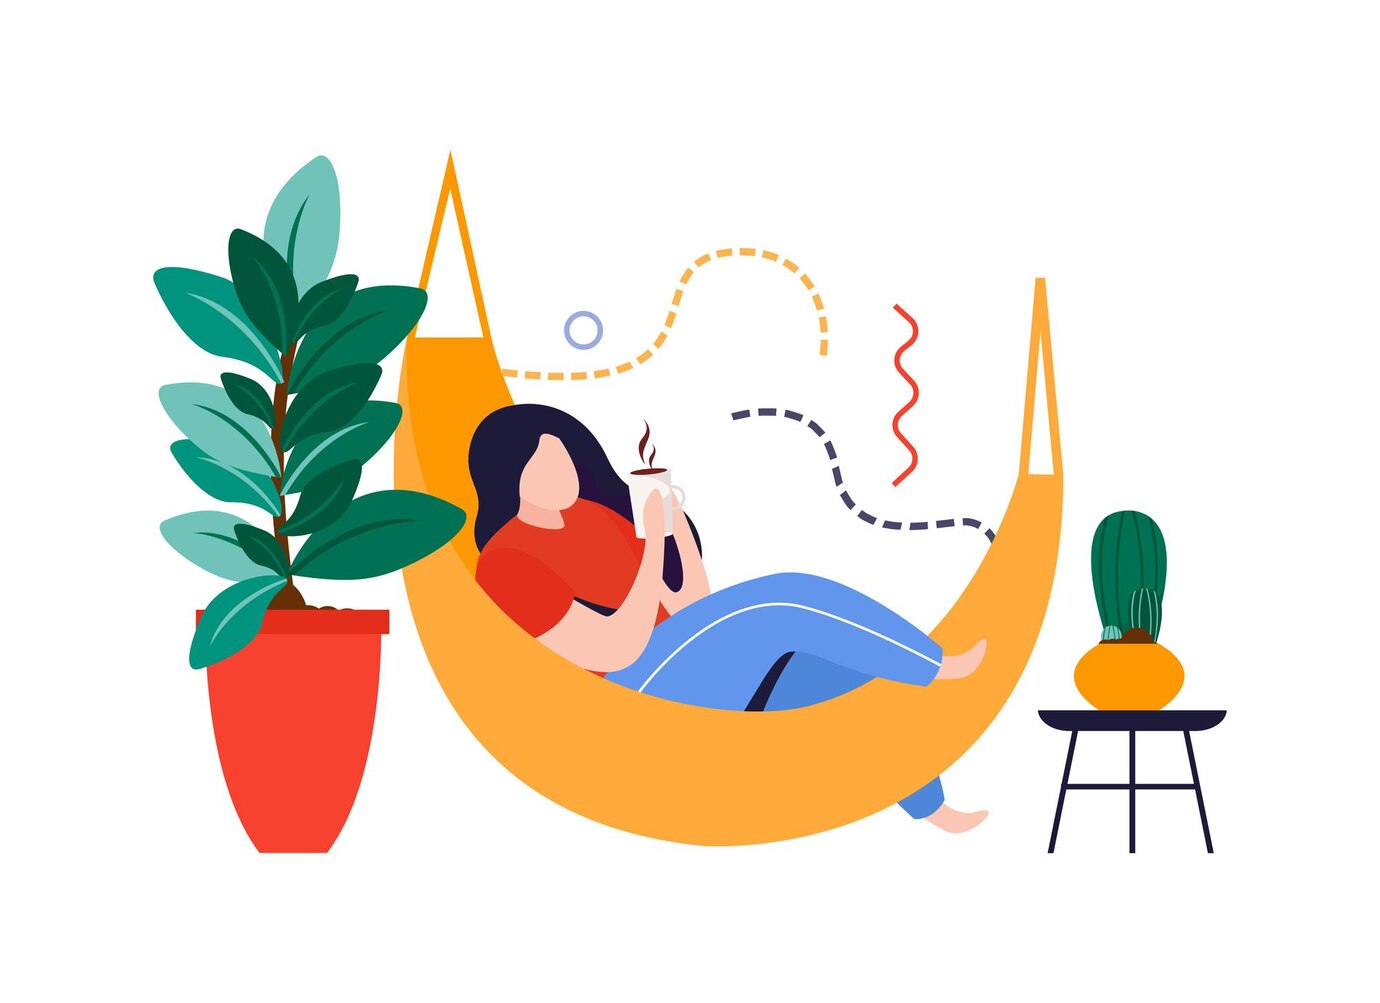 home-garden-flat-composition-with-woman-lying-in-hammock-with-home-plants-vector-illustration_1284-63117.jpg